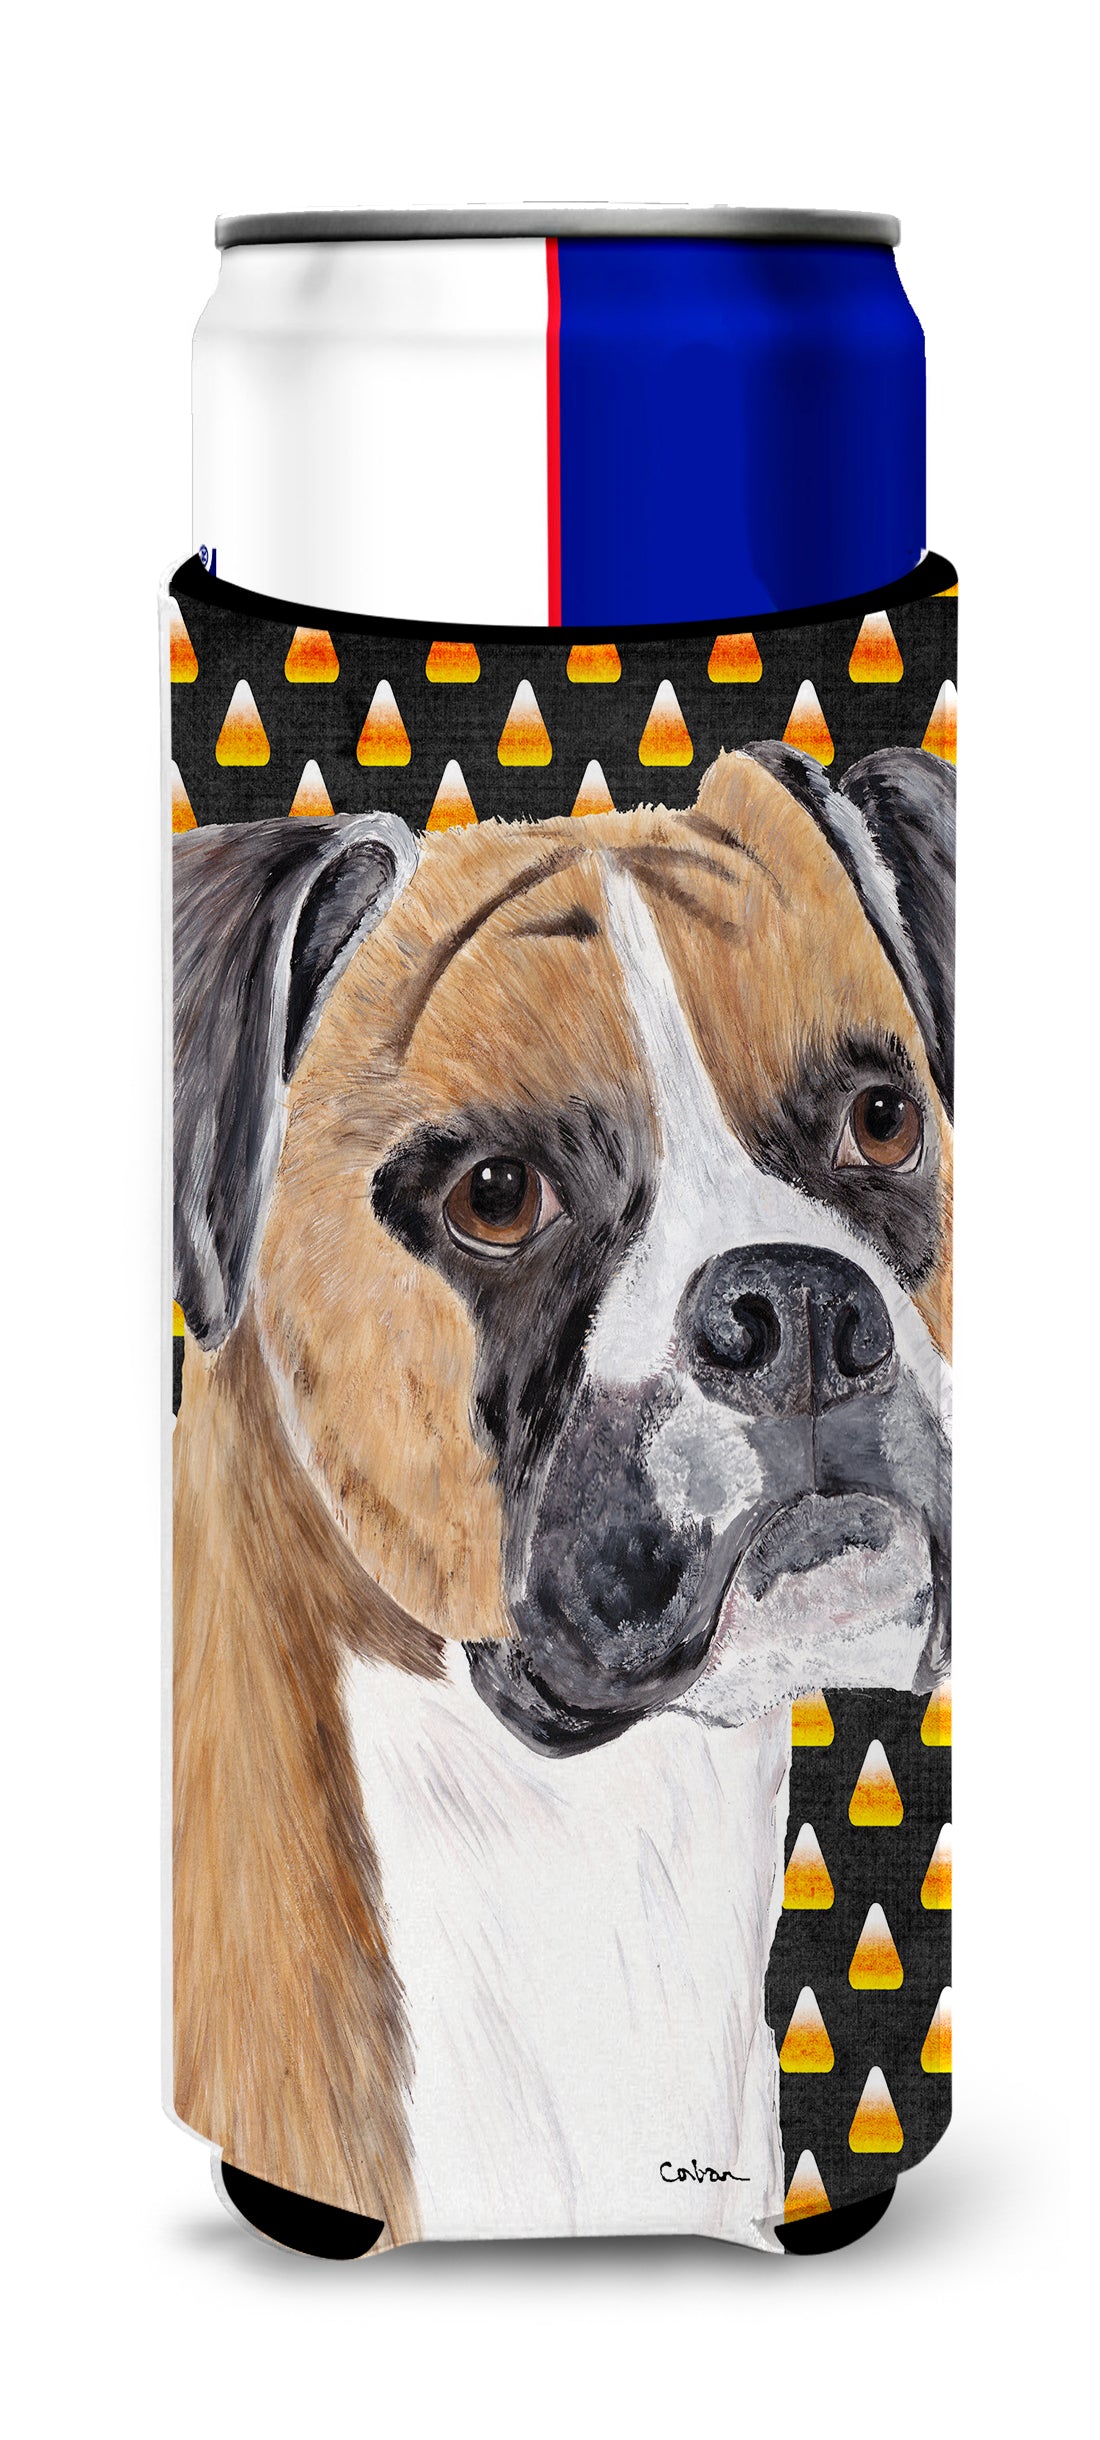 Boxer Fawn Uncropped Ears Candy Corn Halloween Portrait Ultra Beverage Insulators for slim cans SC9191MUK.